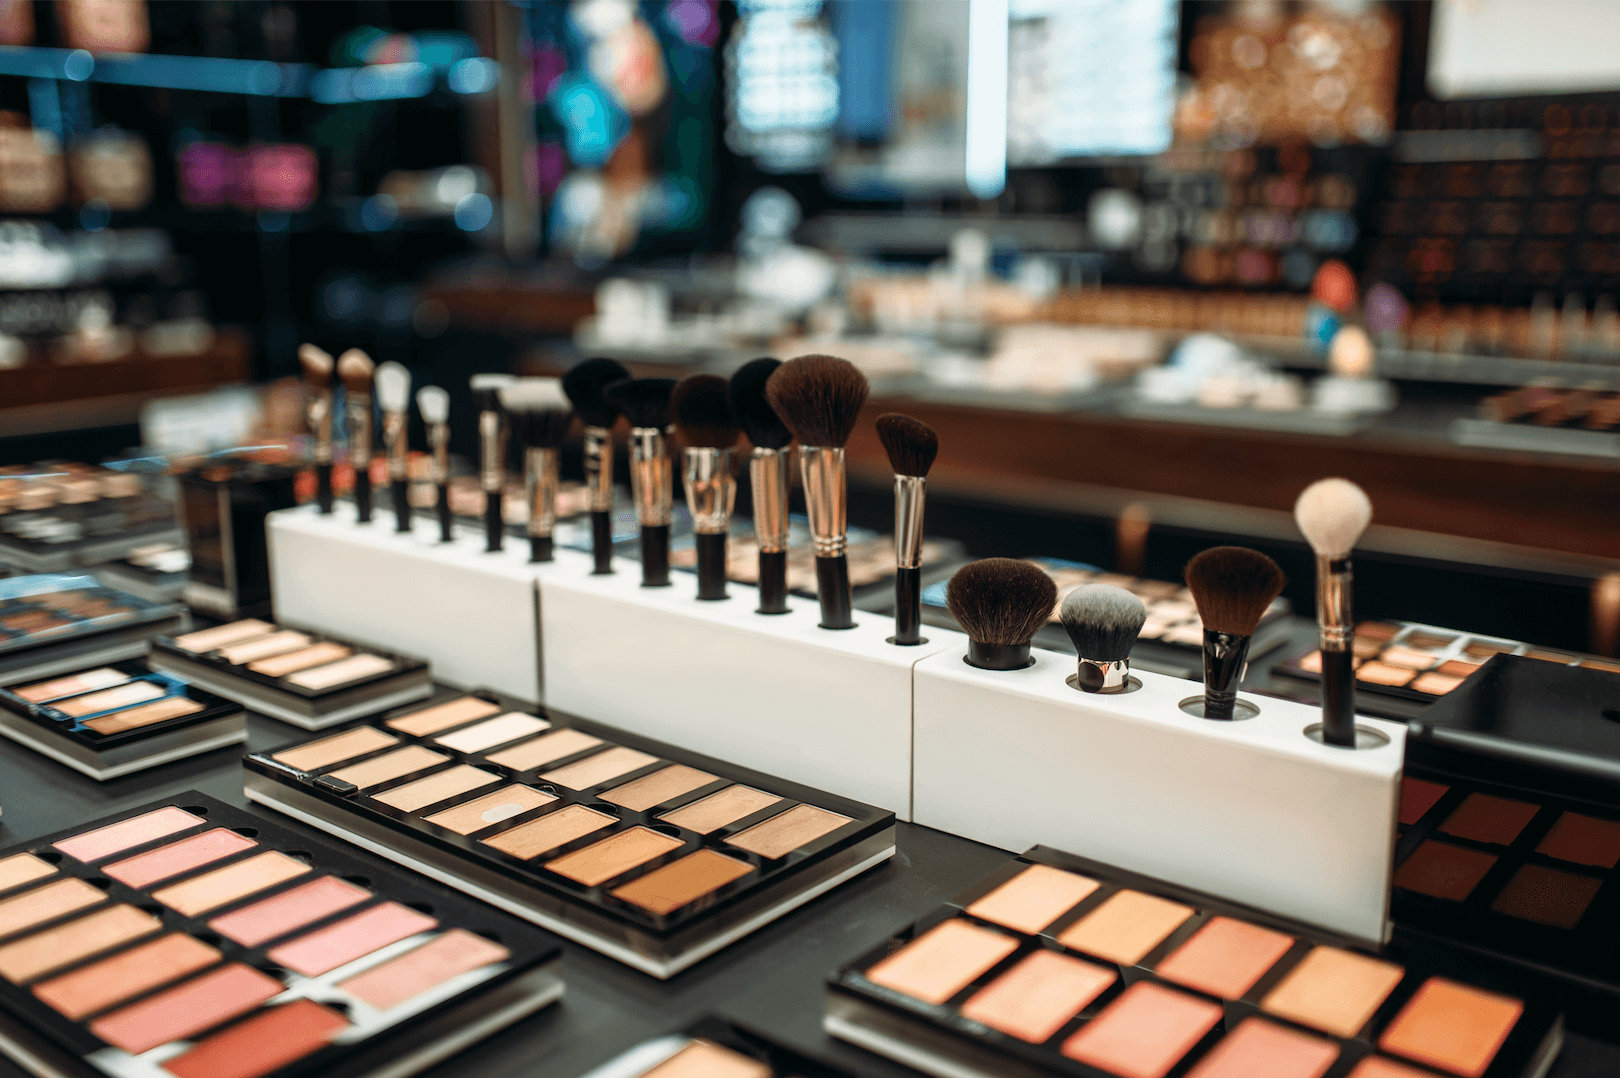 Adding Beauty To Baltimore: Sephora Joins Us In Harbor East